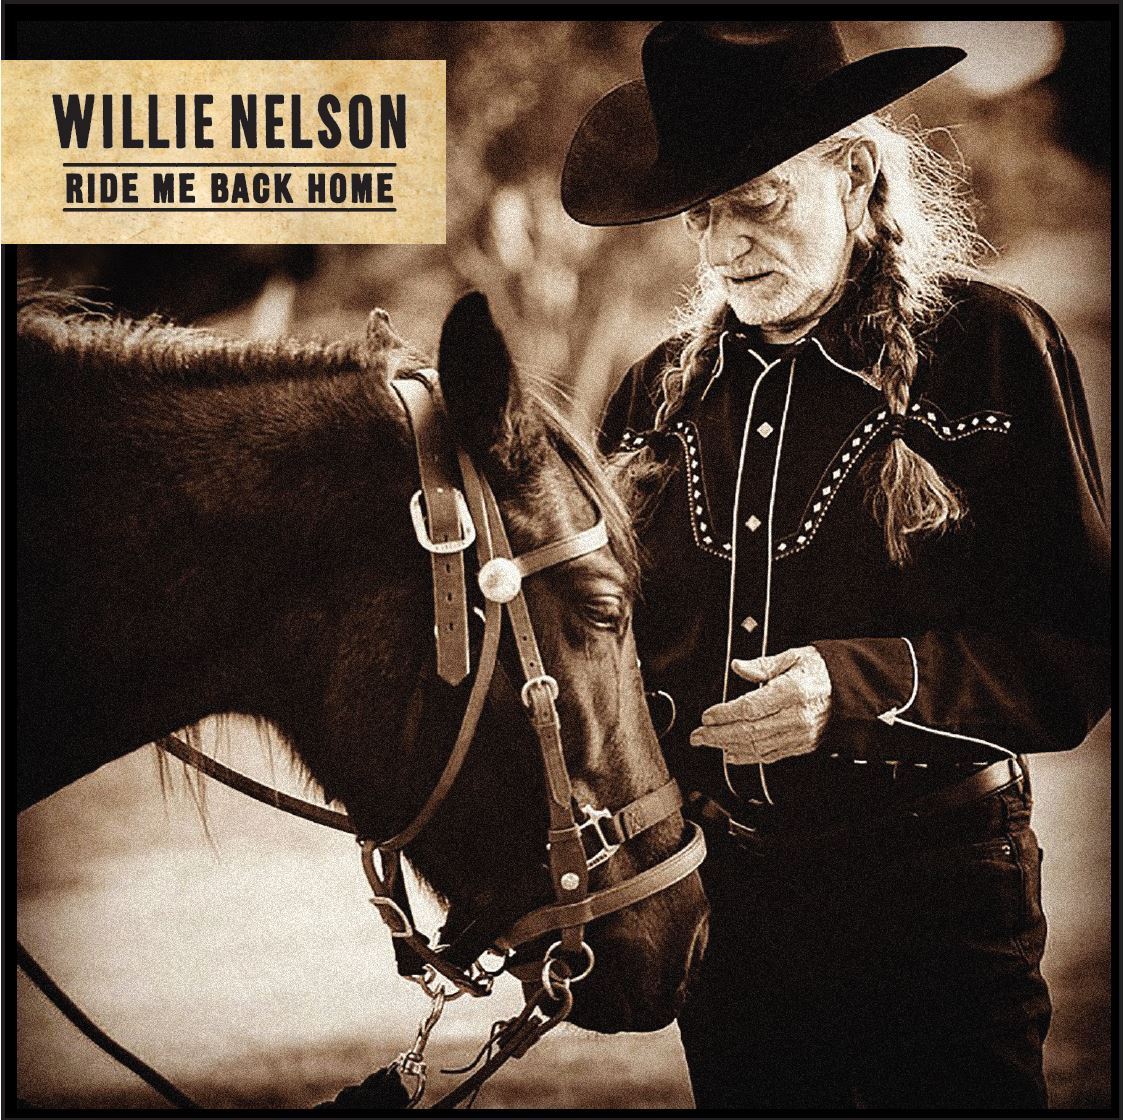 Hear Willie Nelson’s Wistful New Single “Ride Me Back Home”